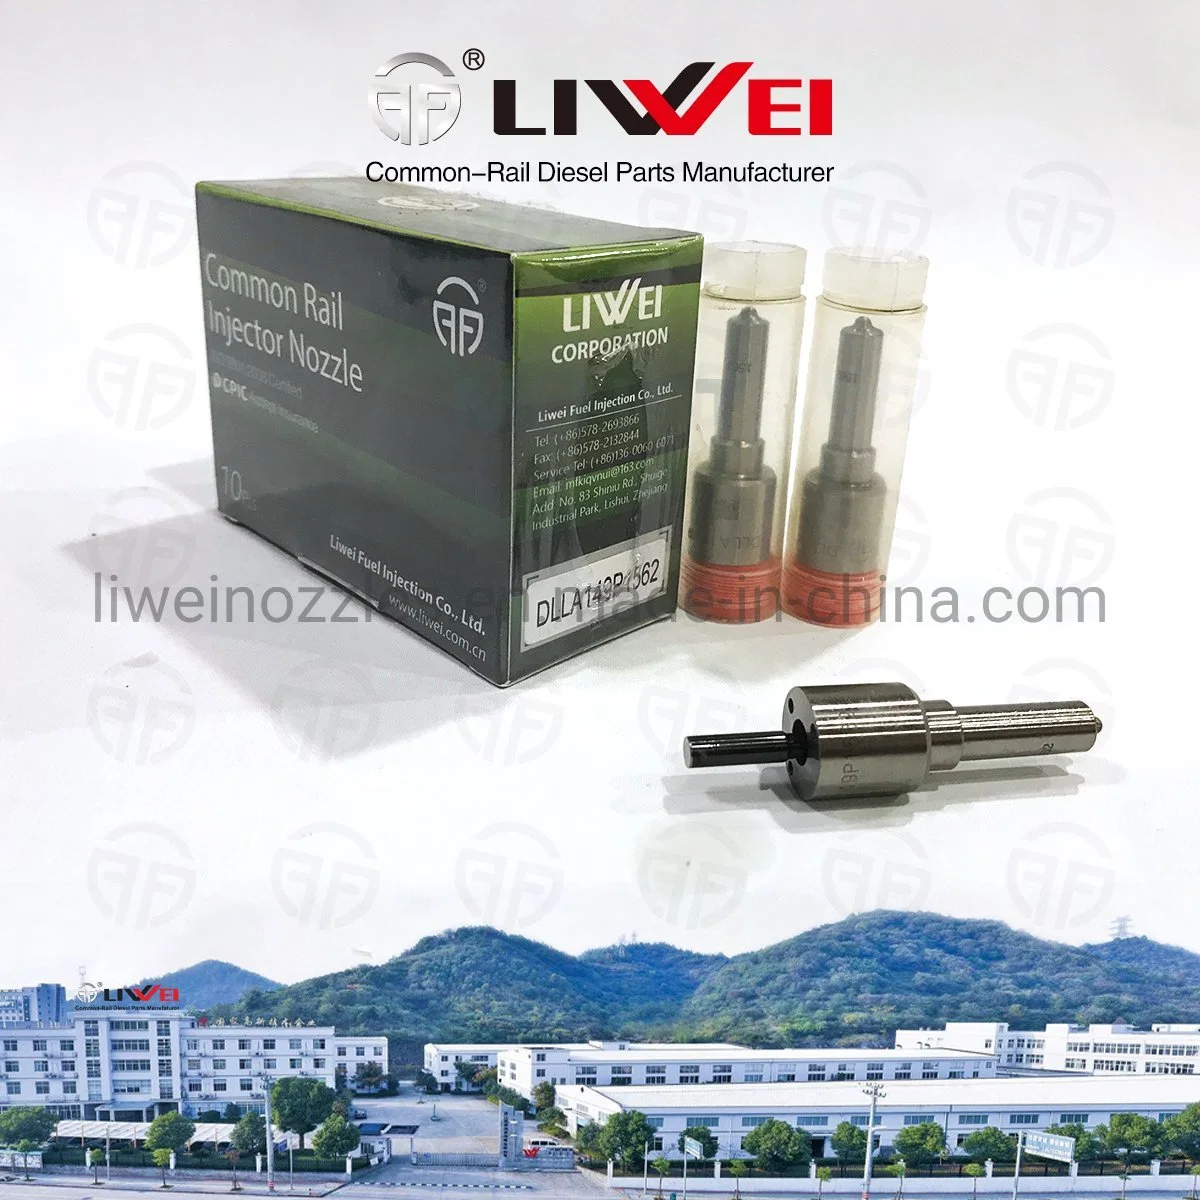 Liwei Brand Diesel Fuel Spraying Systems Nozzle Dlla 149p 1562 Dlla 149p1562 for Comm 0 445 120 063/340